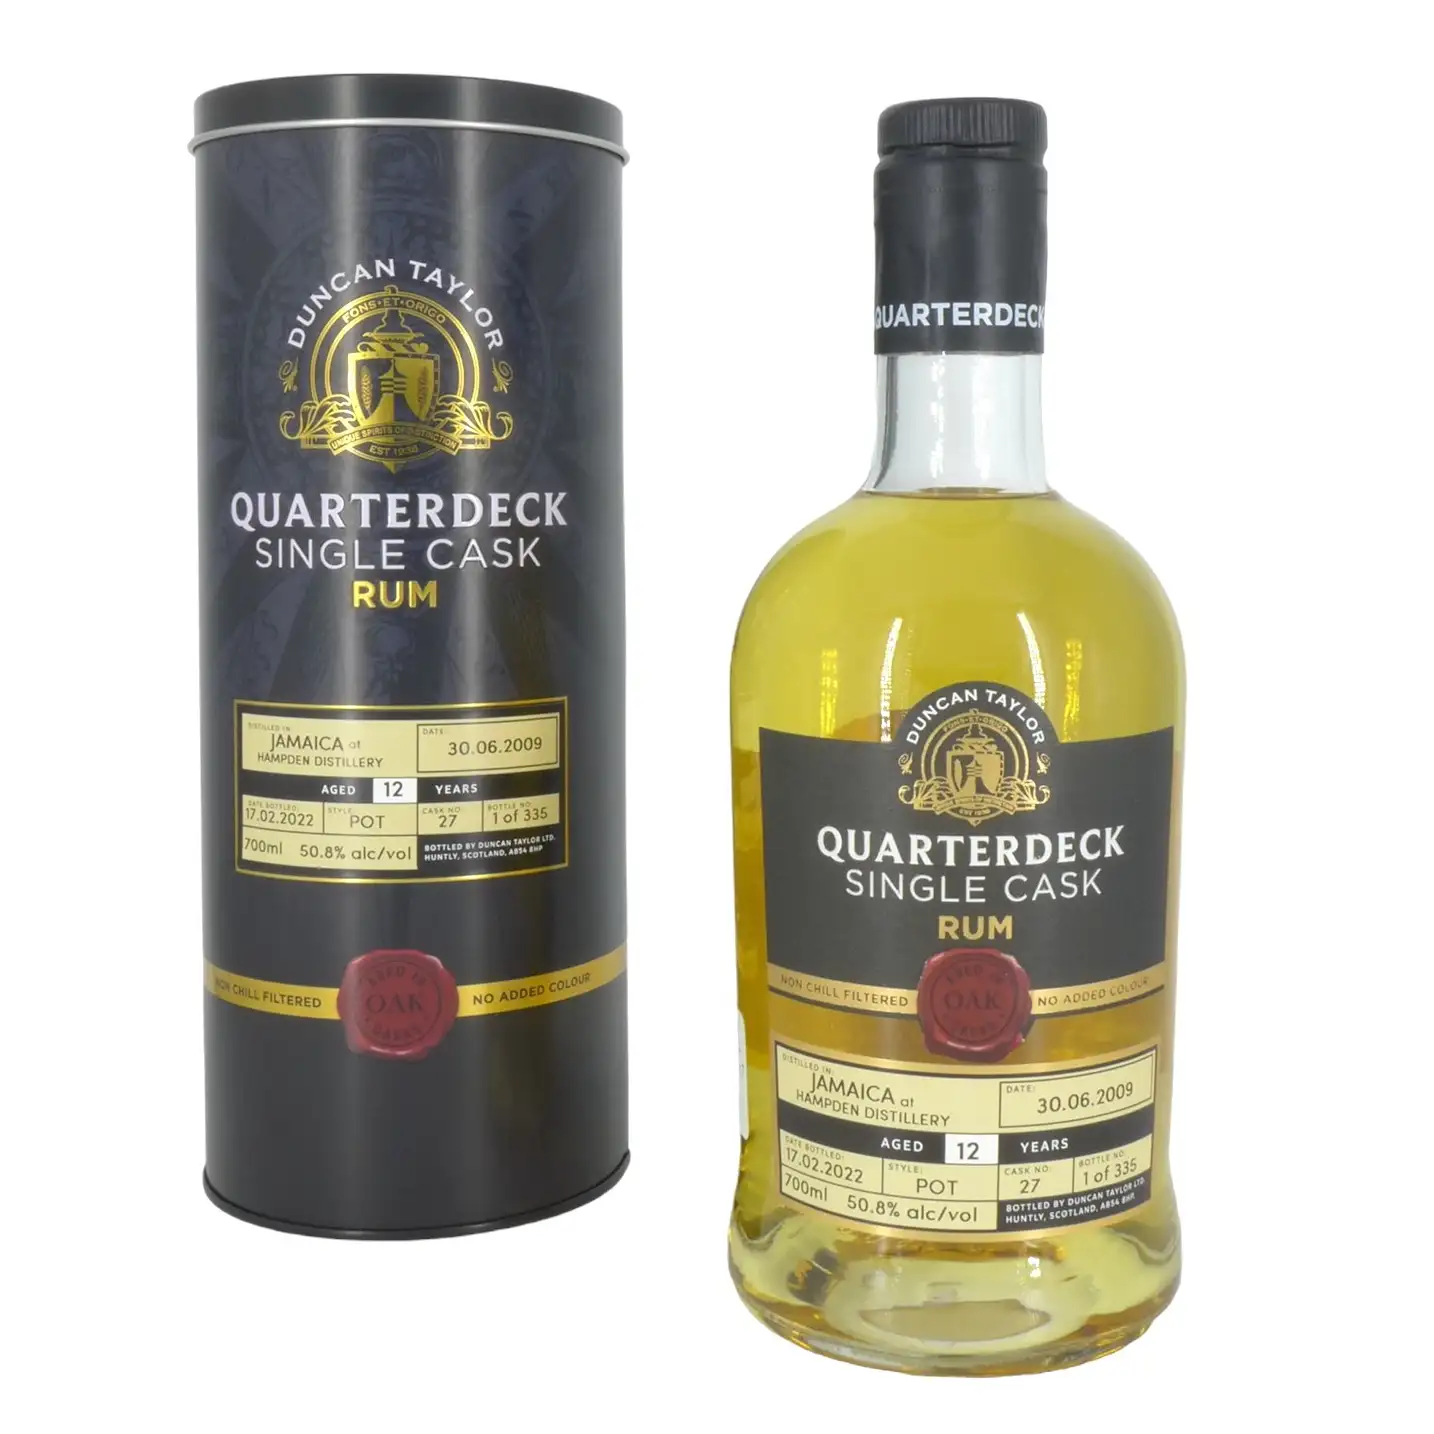 Image of the front of the bottle of the rum Quarterdeck Single Cask Jamaica Rum